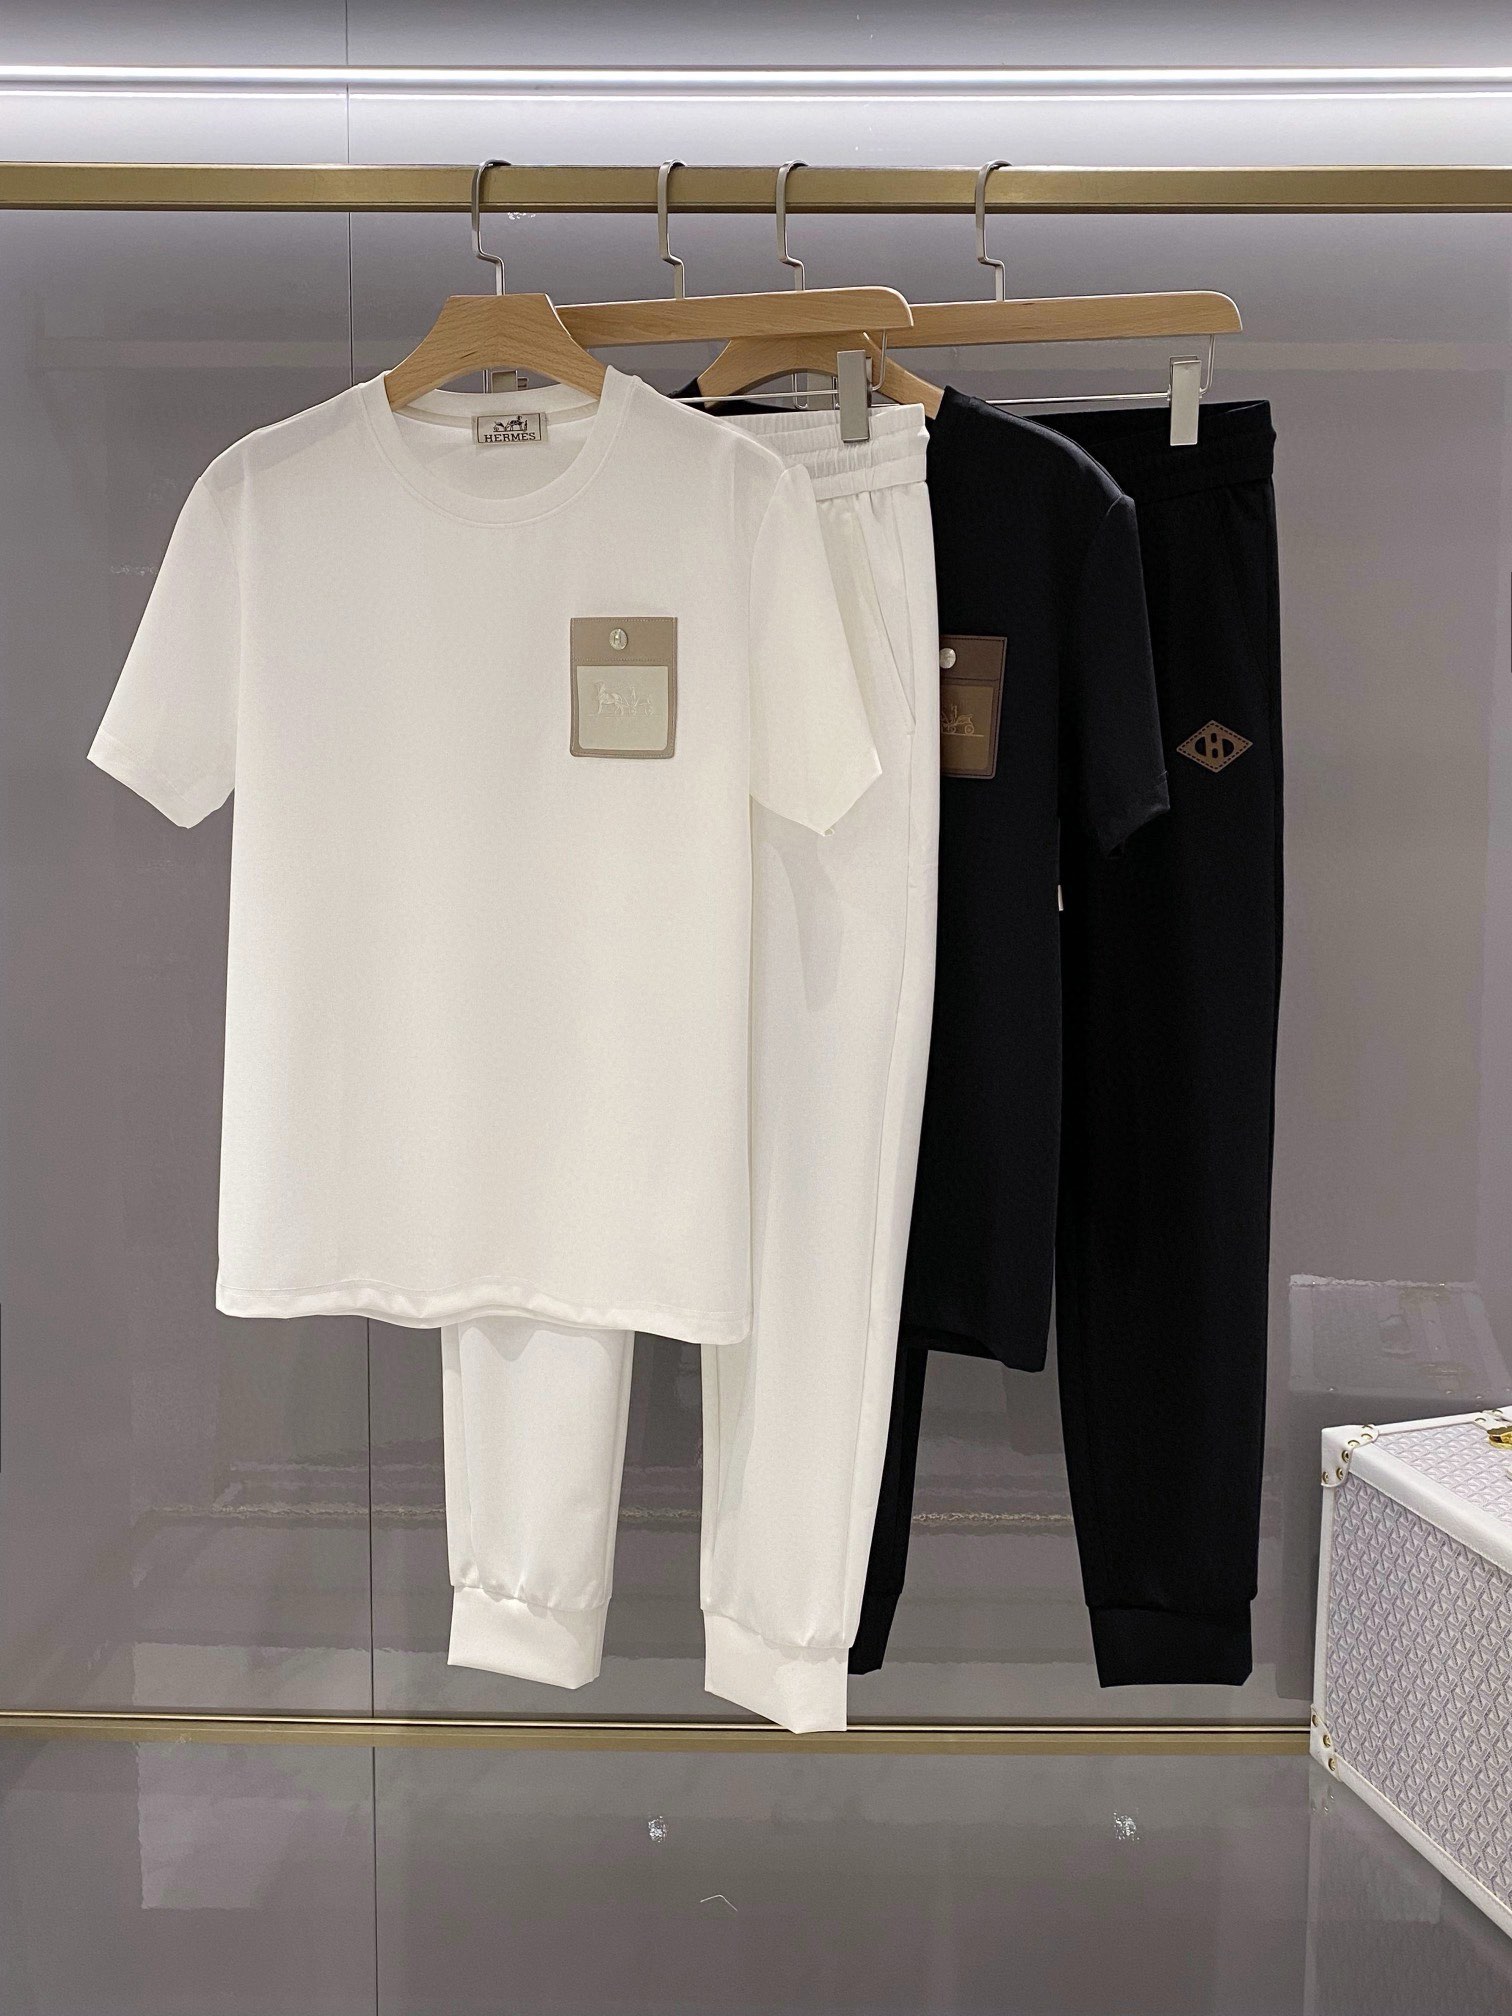 Is it illegal to buy
 Hermes Clothing Pants & Trousers T-Shirt Two Piece Outfits & Matching Sets Buy Top High quality Replica
 Black White Embroidery Men Spandex Spring/Summer Collection Fashion Short Sleeve